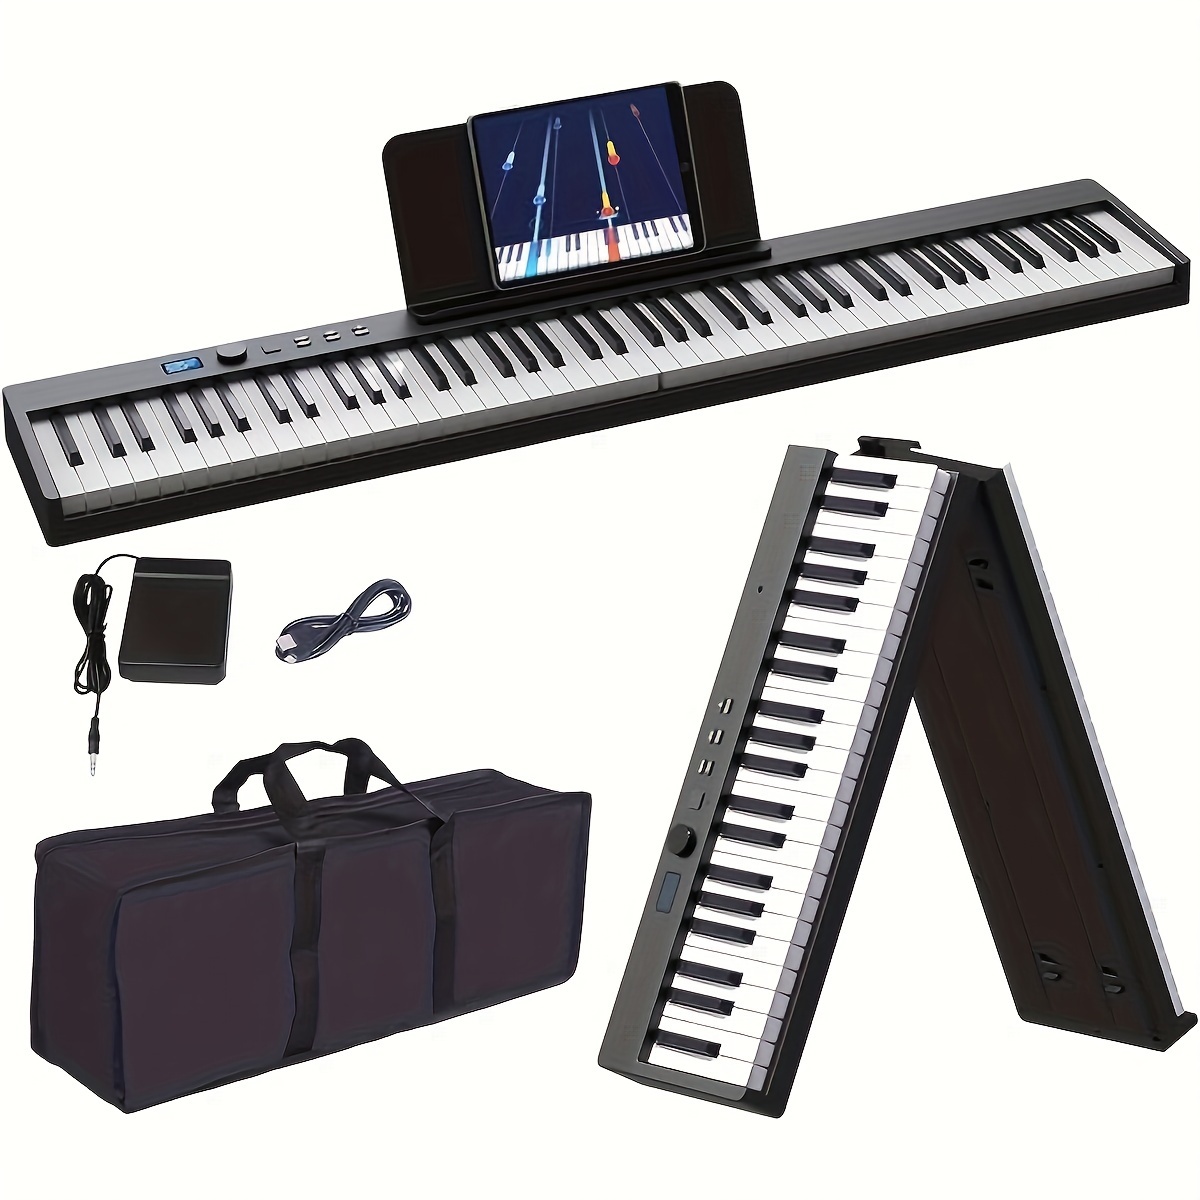 KONIX 61 Key Folding Piano Keyboard, Portable Touch Sensitive Foldable  Keyboard Piano for Beginners Kids with MIDI, Speakers and Piano Bag